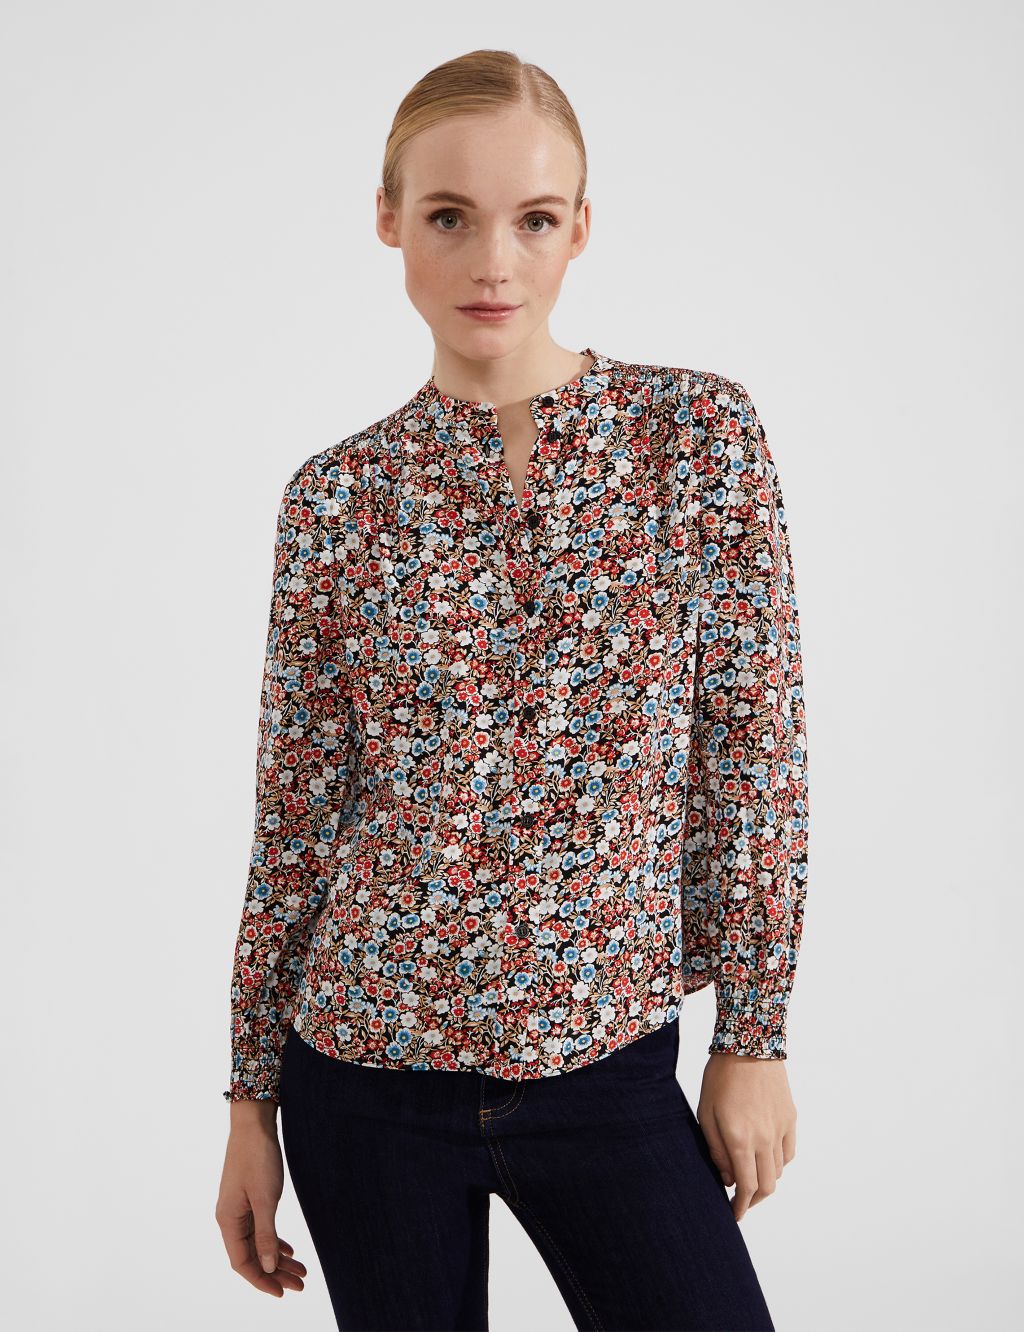 Women's Floral Shirts & Blouses Available at M&S